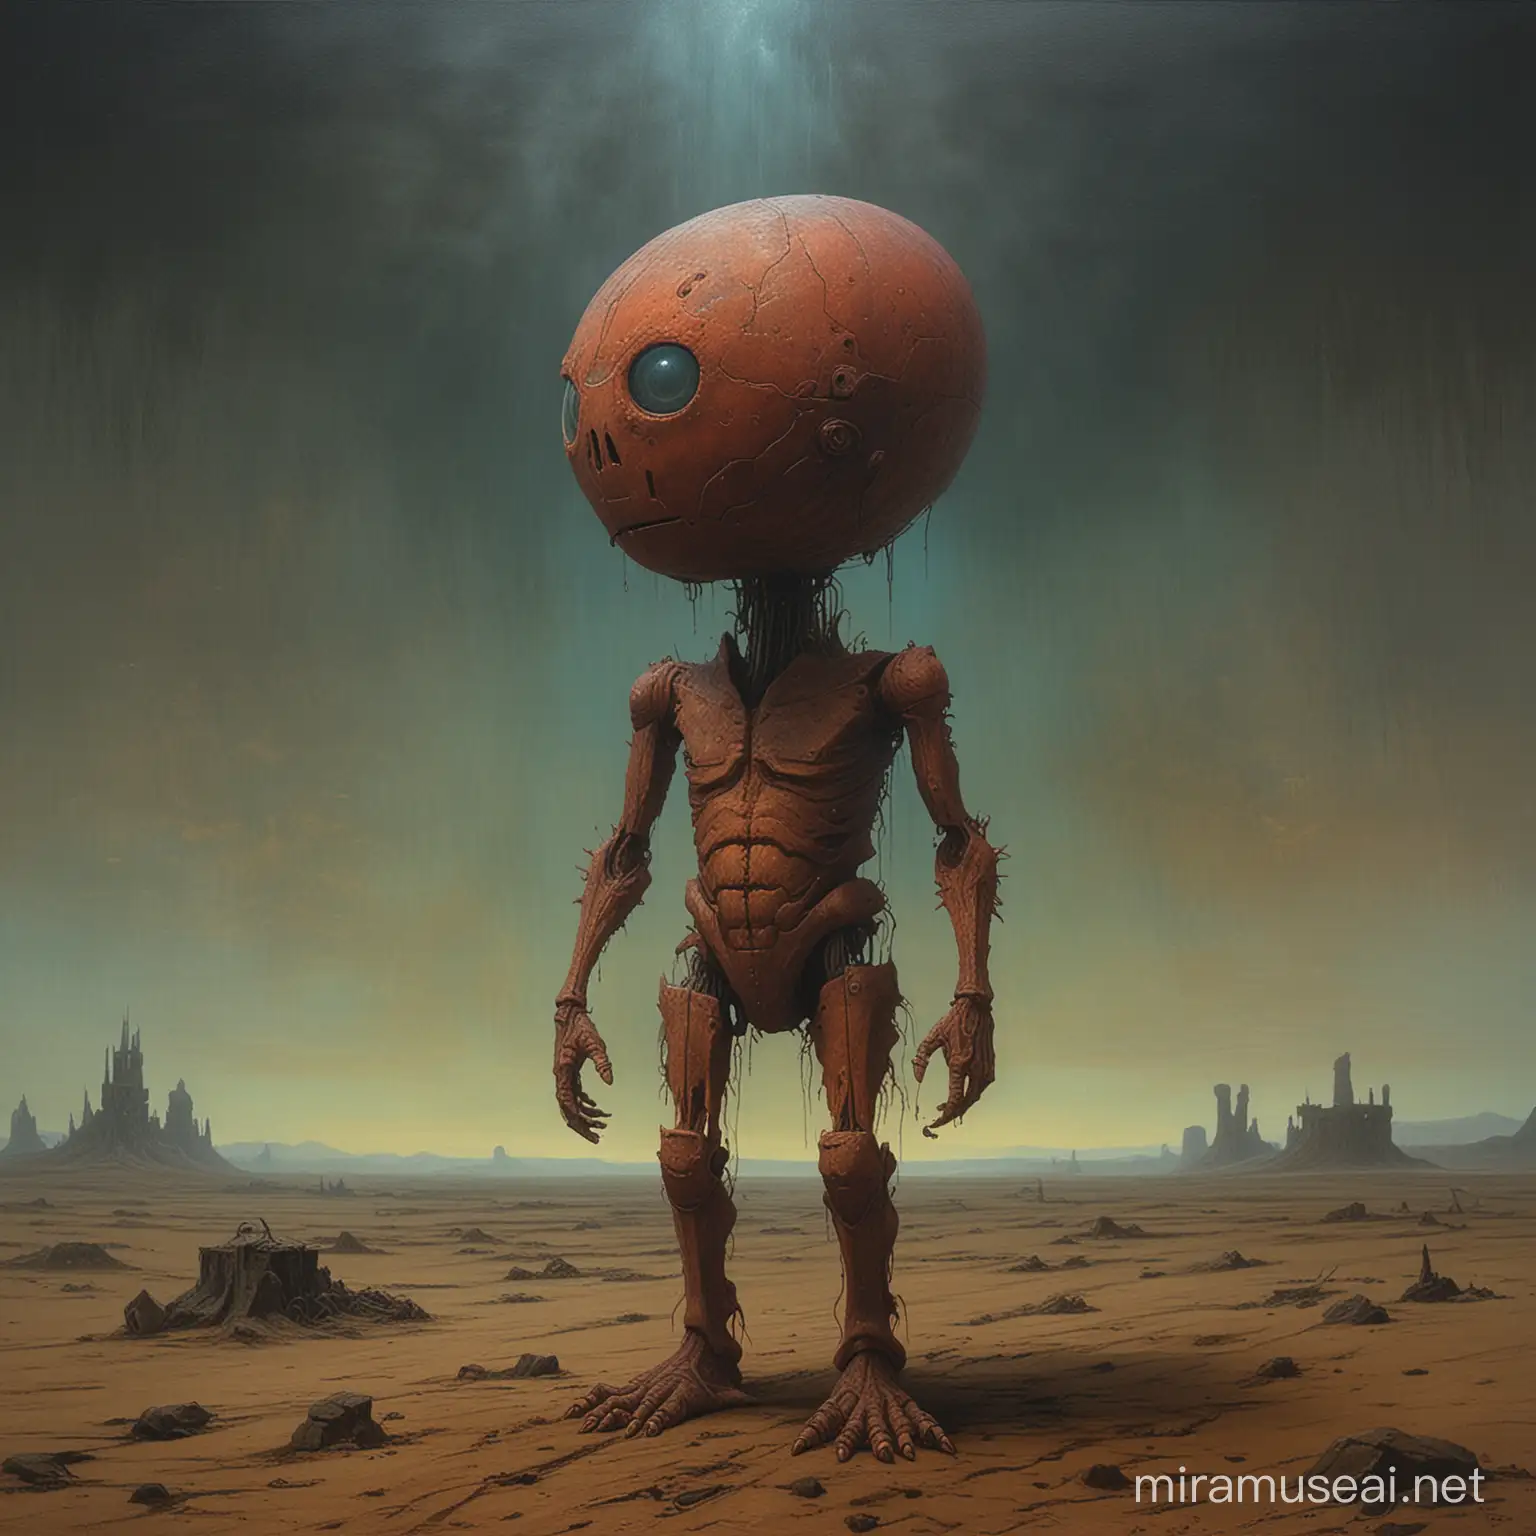 A toy painted in the style of Zdzisław Beksiński paintings 